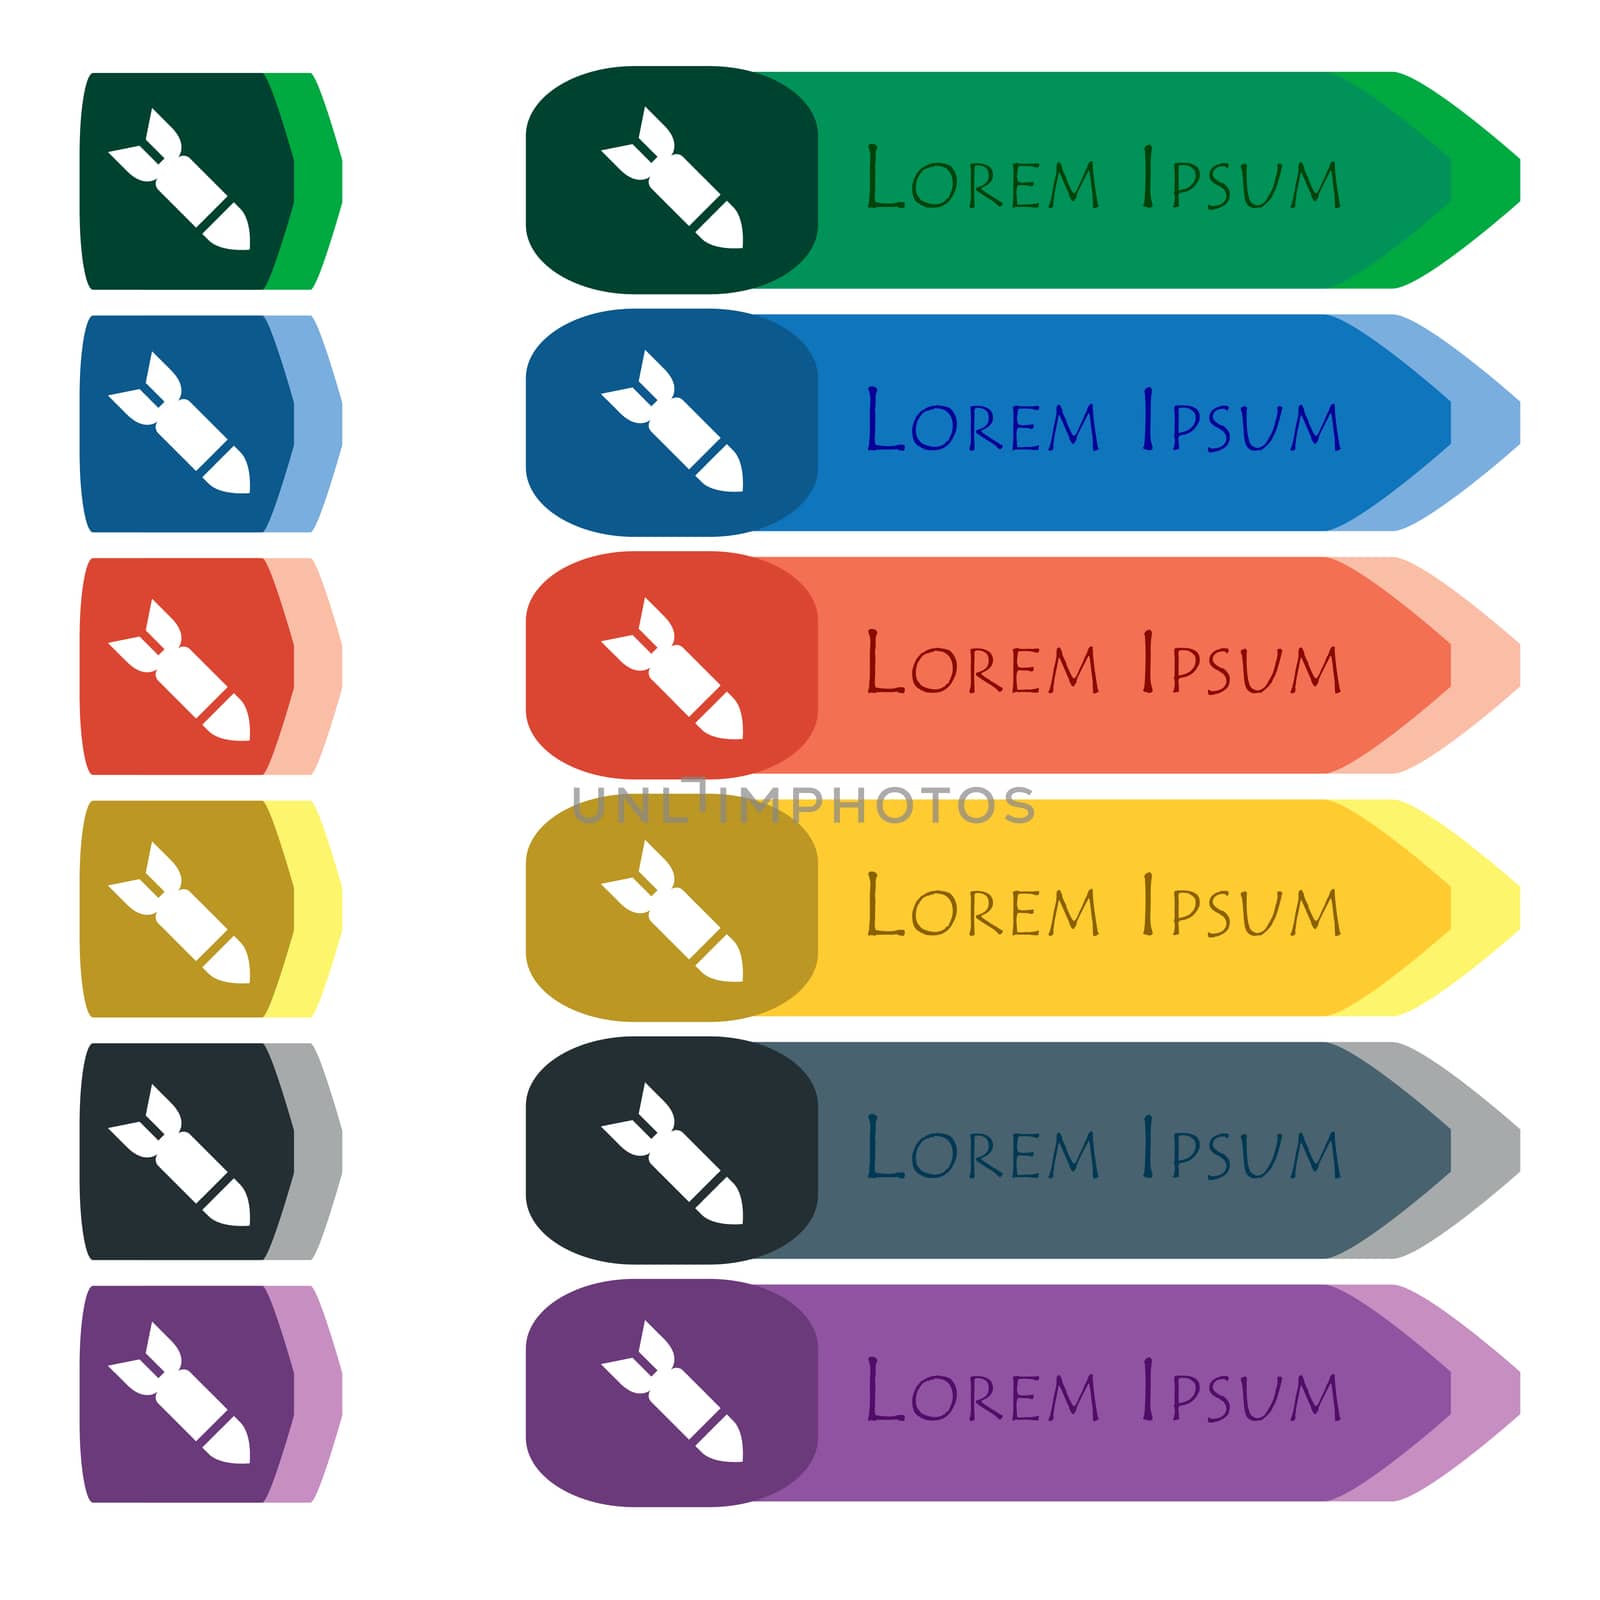 Missile,Rocket weapon icon sign. Set of colorful, bright long buttons with additional small modules. Flat design. 